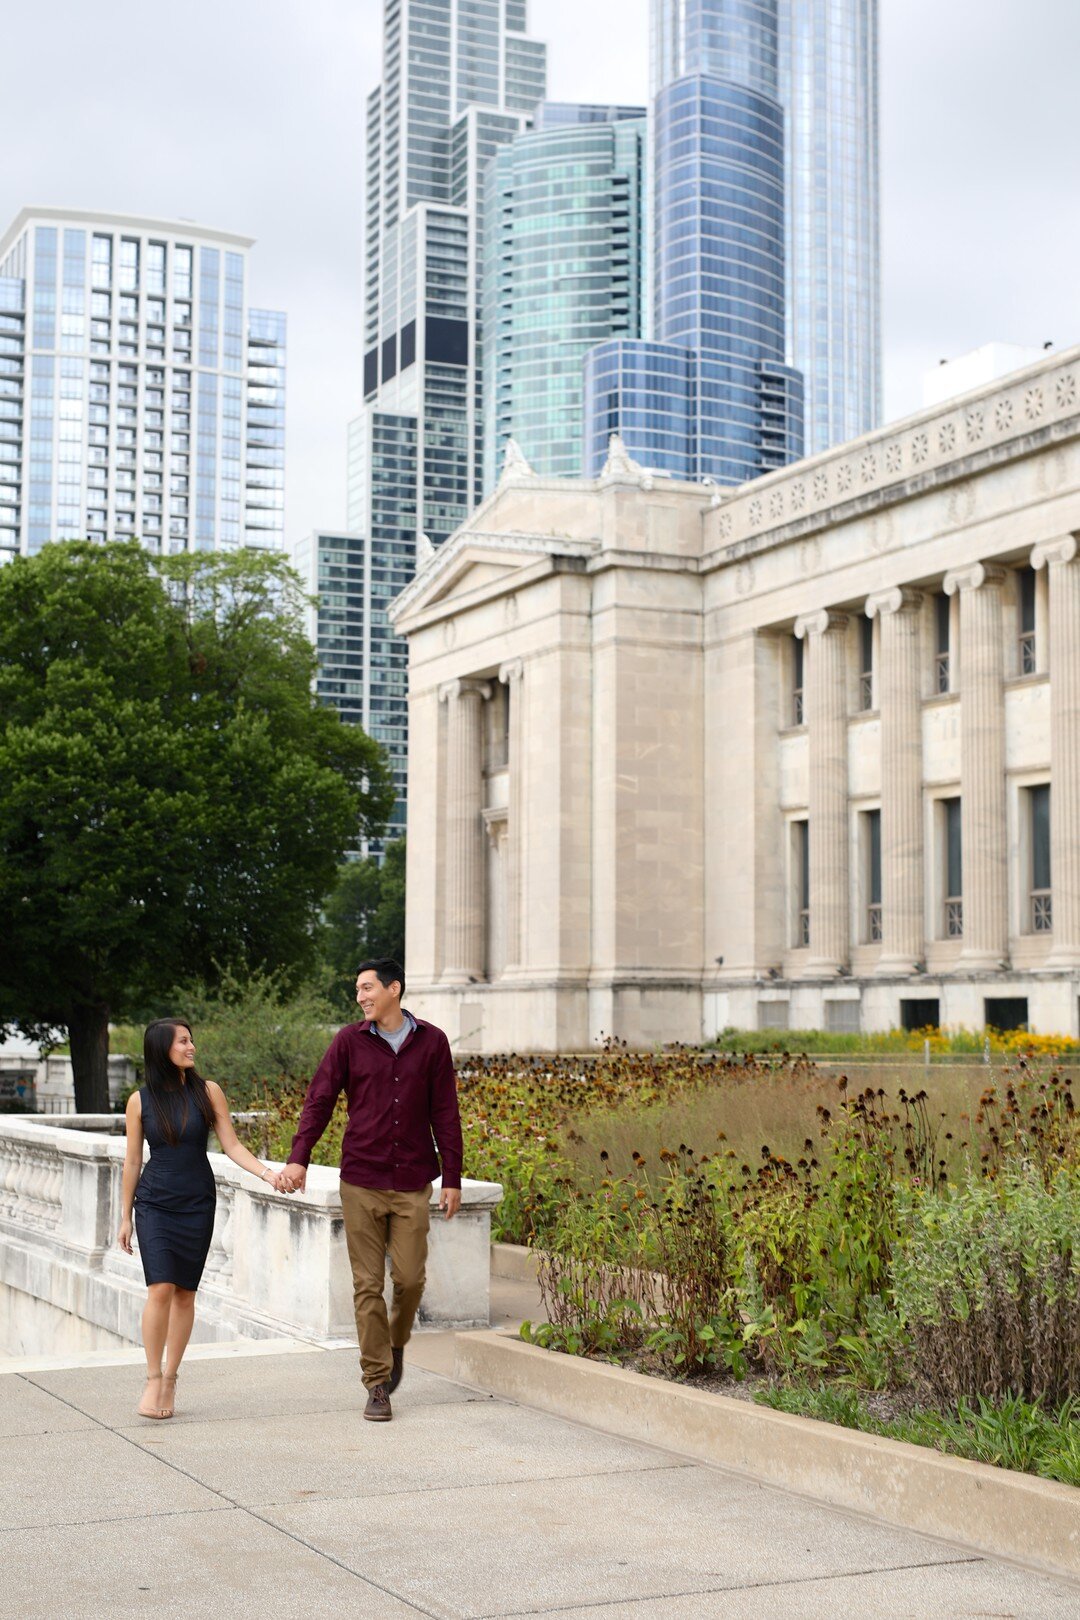 Chic Downtown Chicago Engagement Session captured by Abigail Grace Photography. See more engagement photo ideas on CHItheeWED.com!